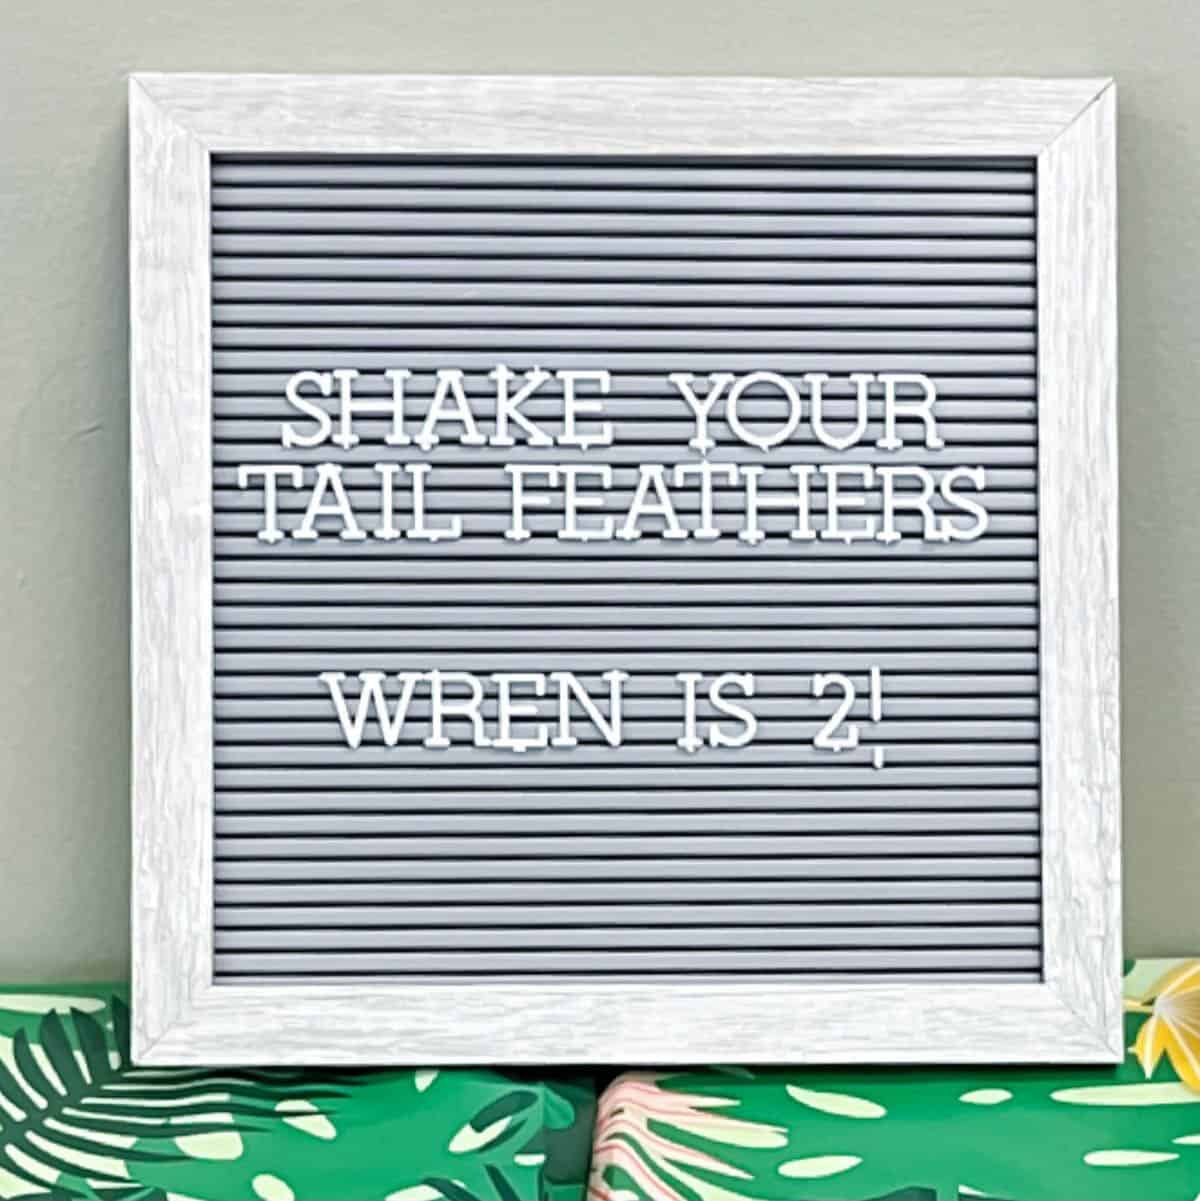 A letter board that says Shake Your Tail feathers for a birthday party